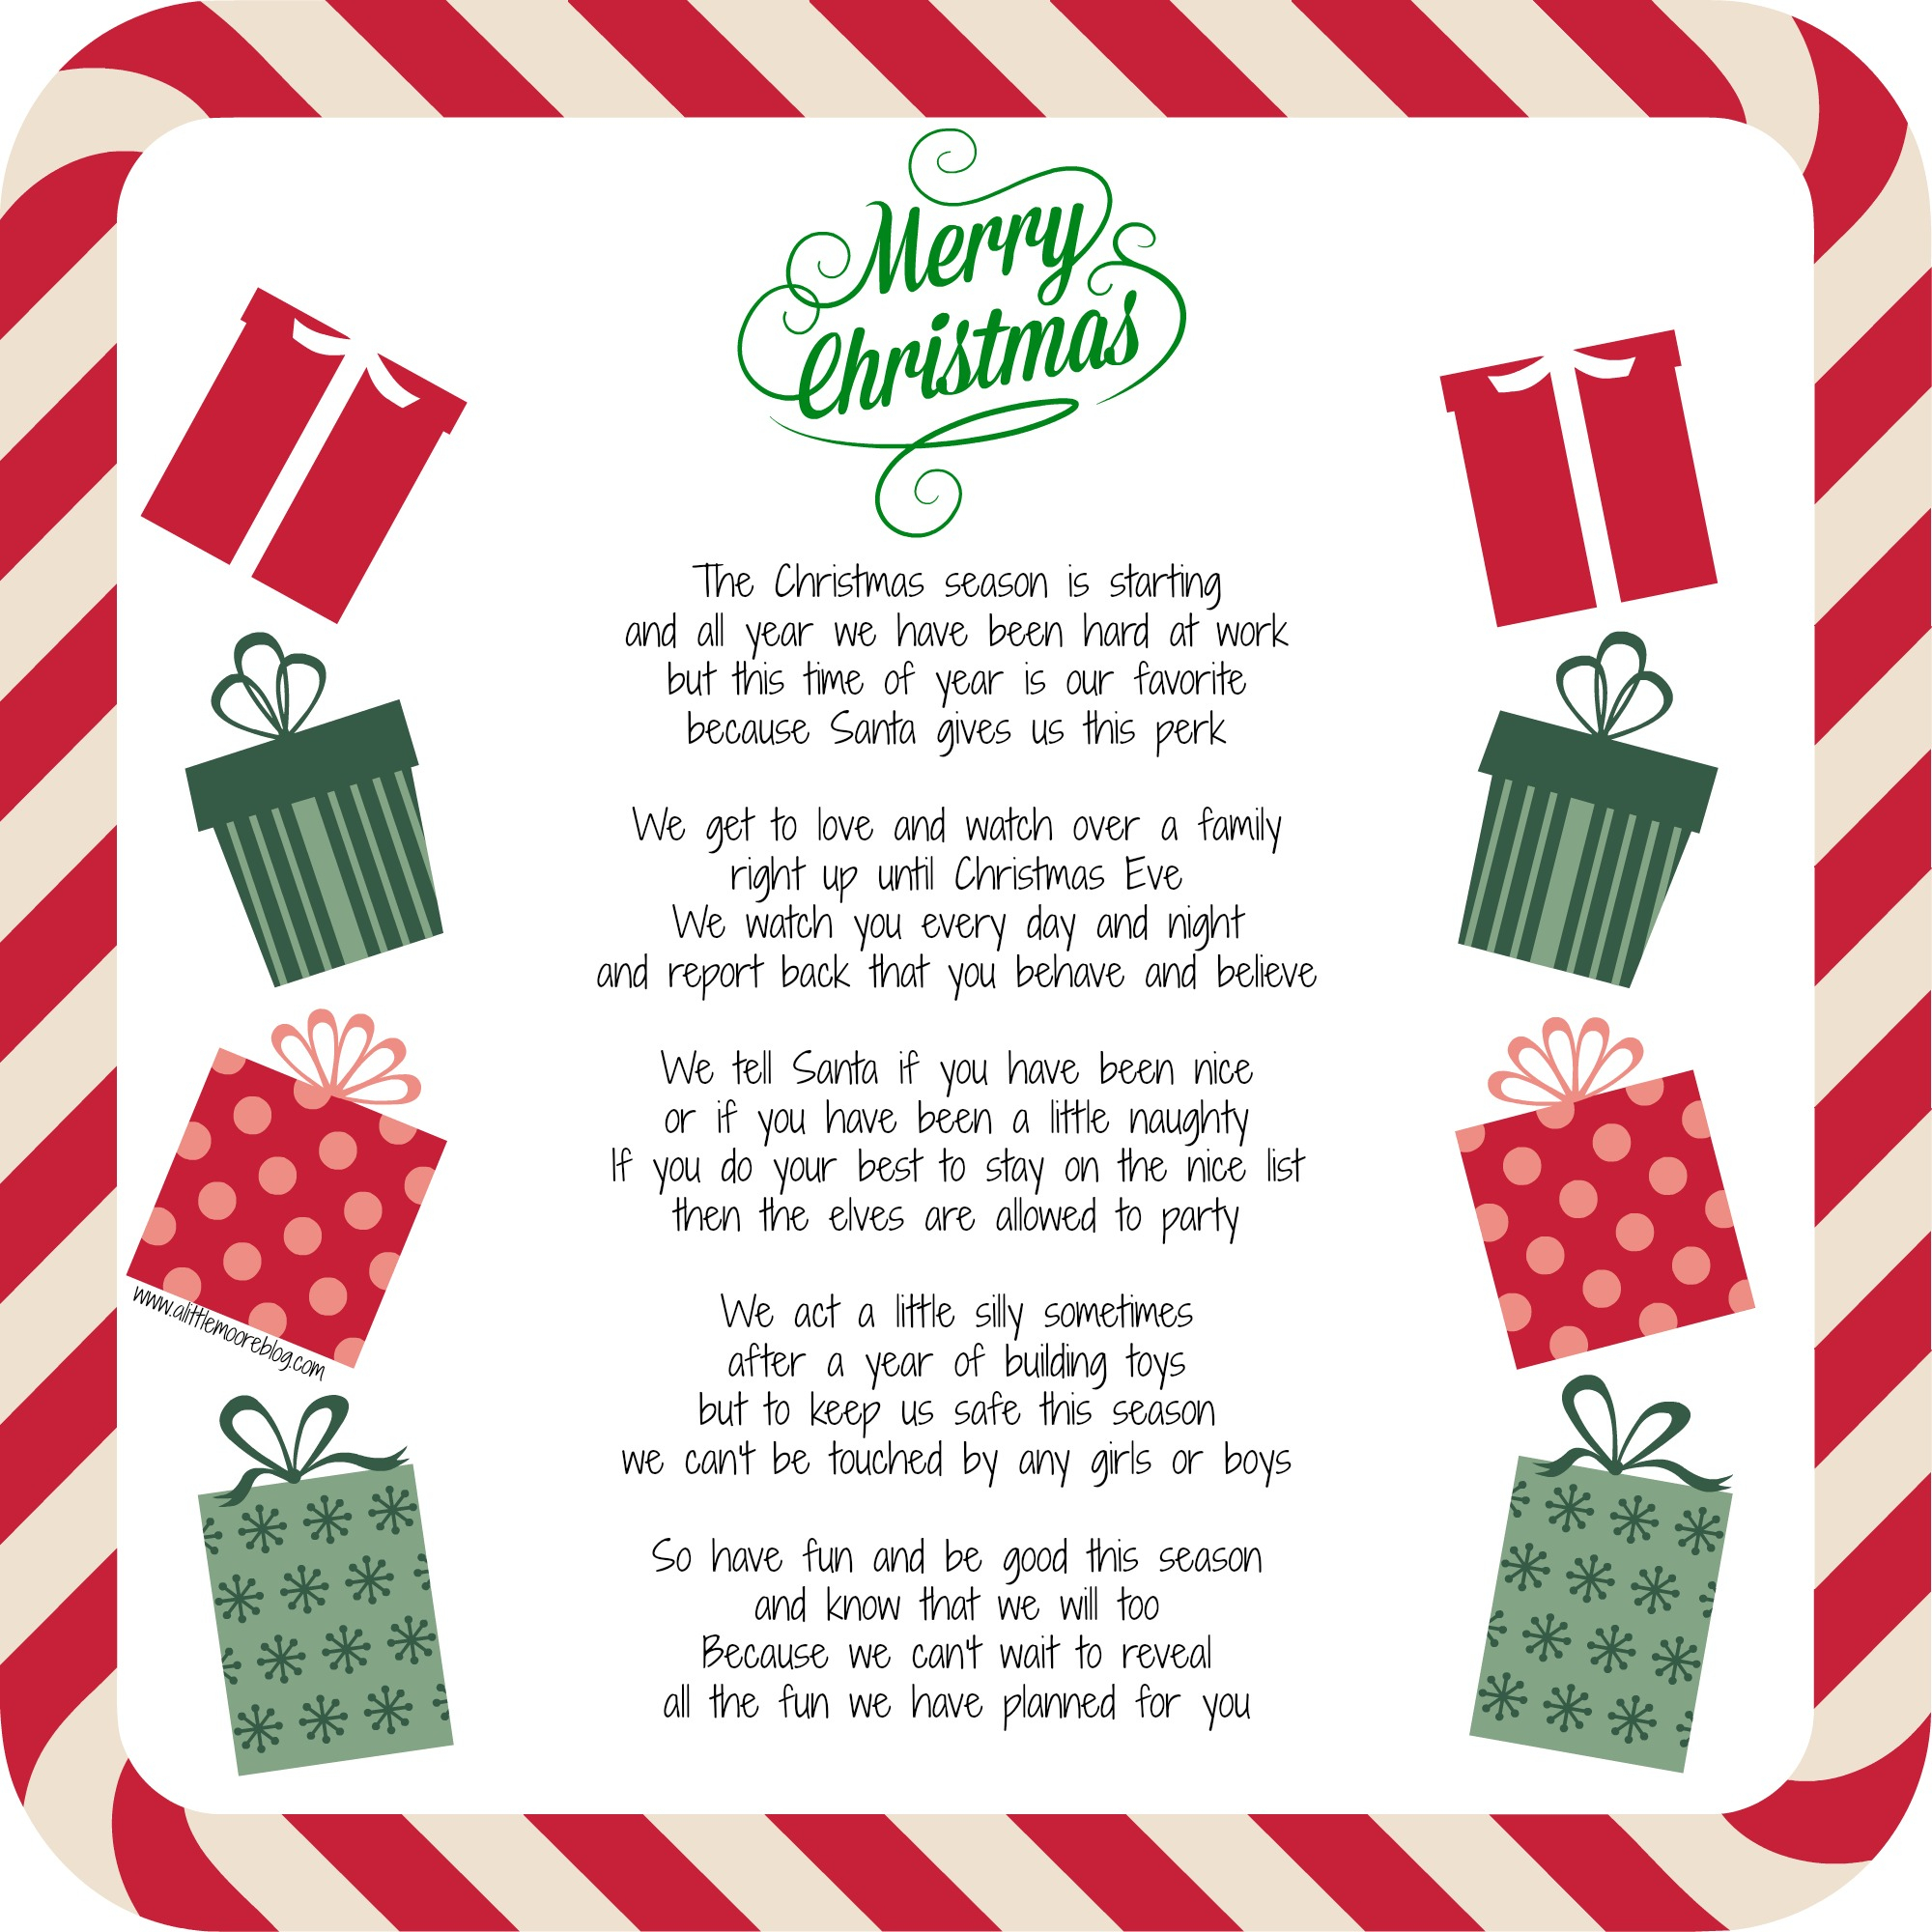 21+ Elf On The Shelf Letter Templates Free Download With Goodbye Letter From Elf On The Shelf Template